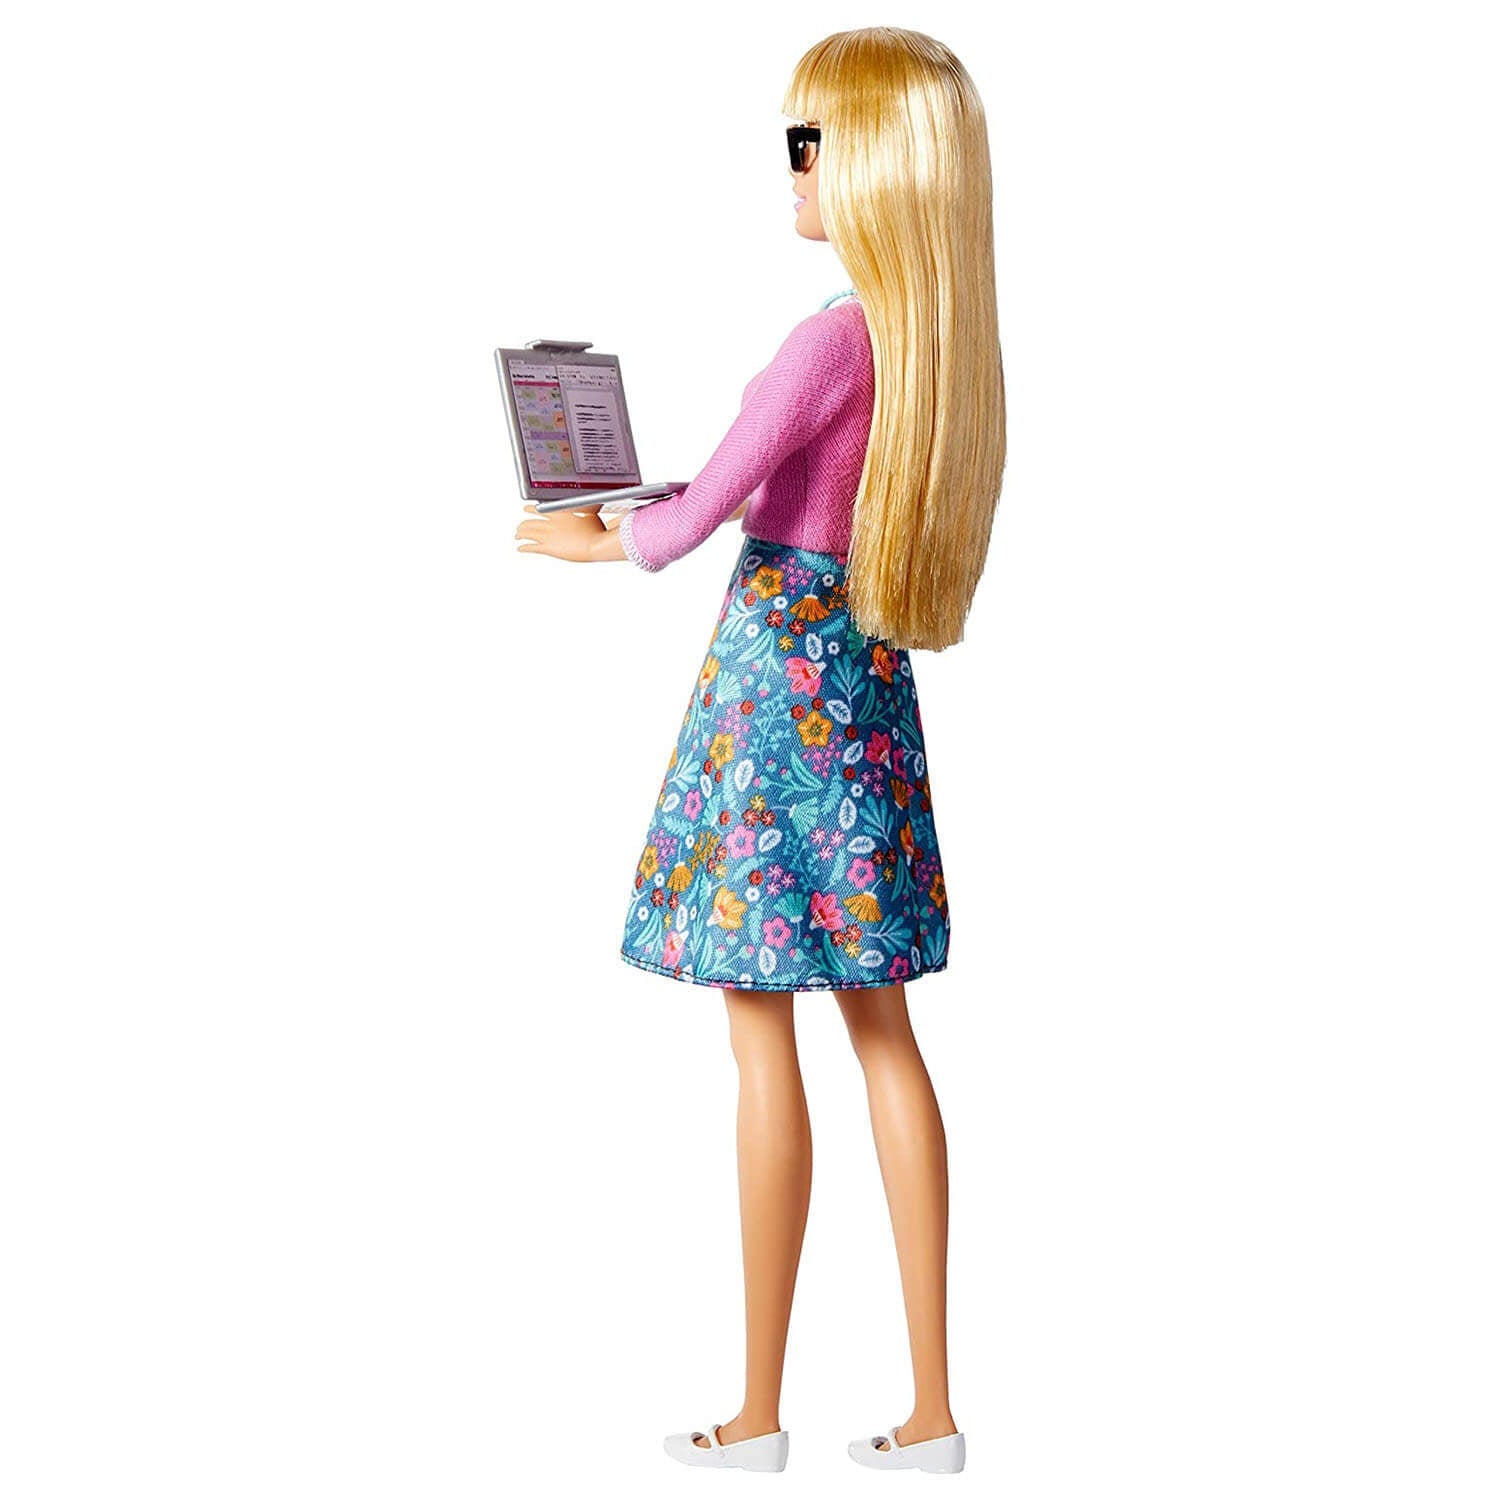 Back view of the barbie.